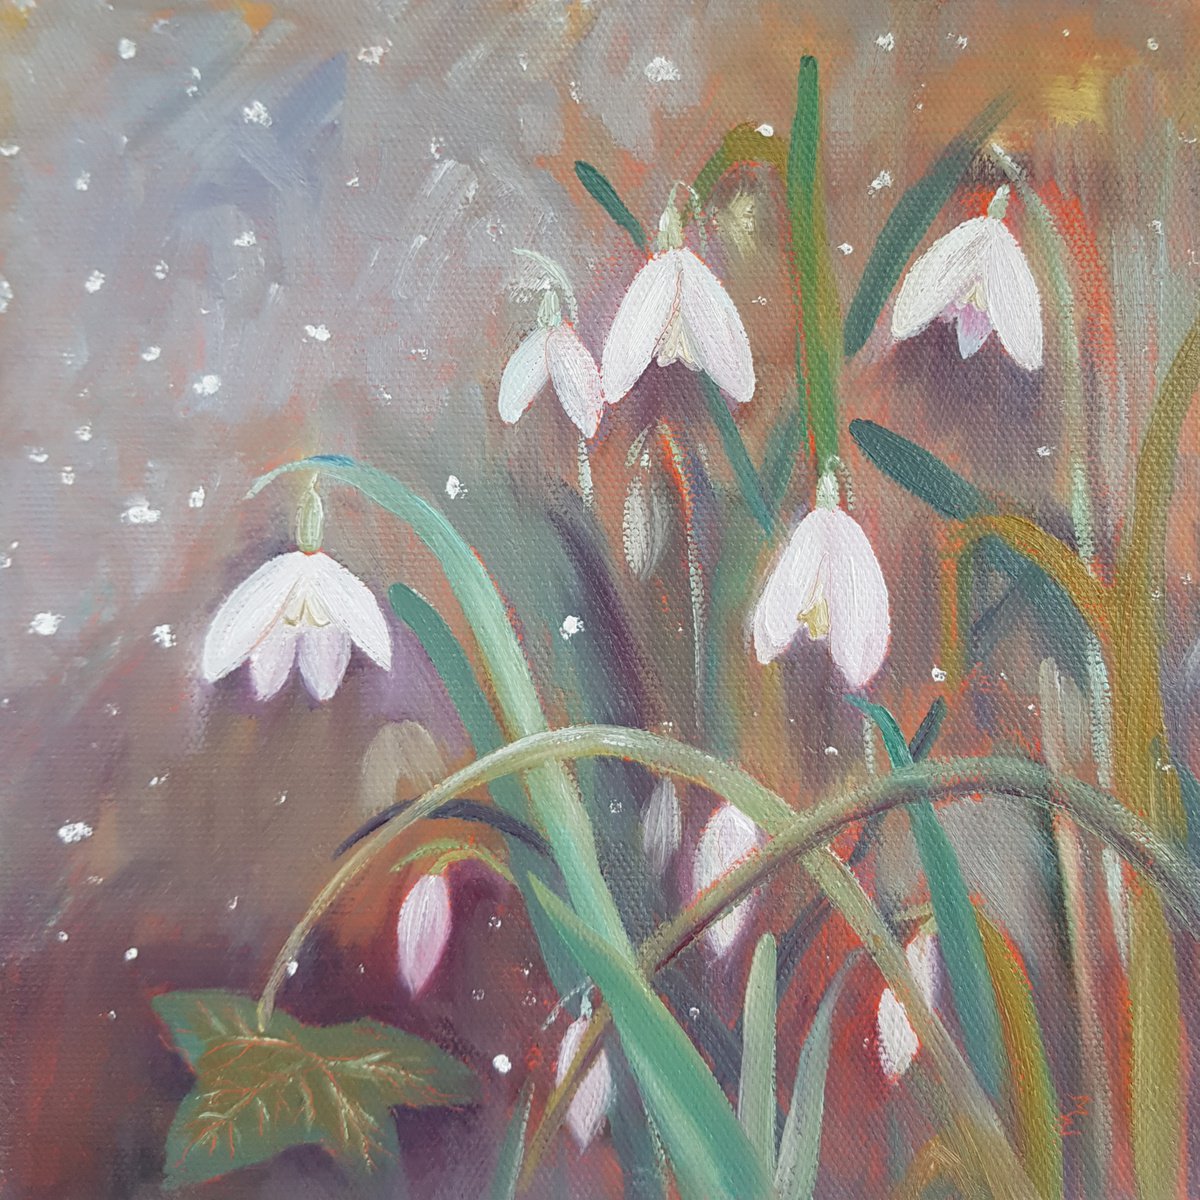 Snowdrops and Ivy Leaf by Michele Wallington